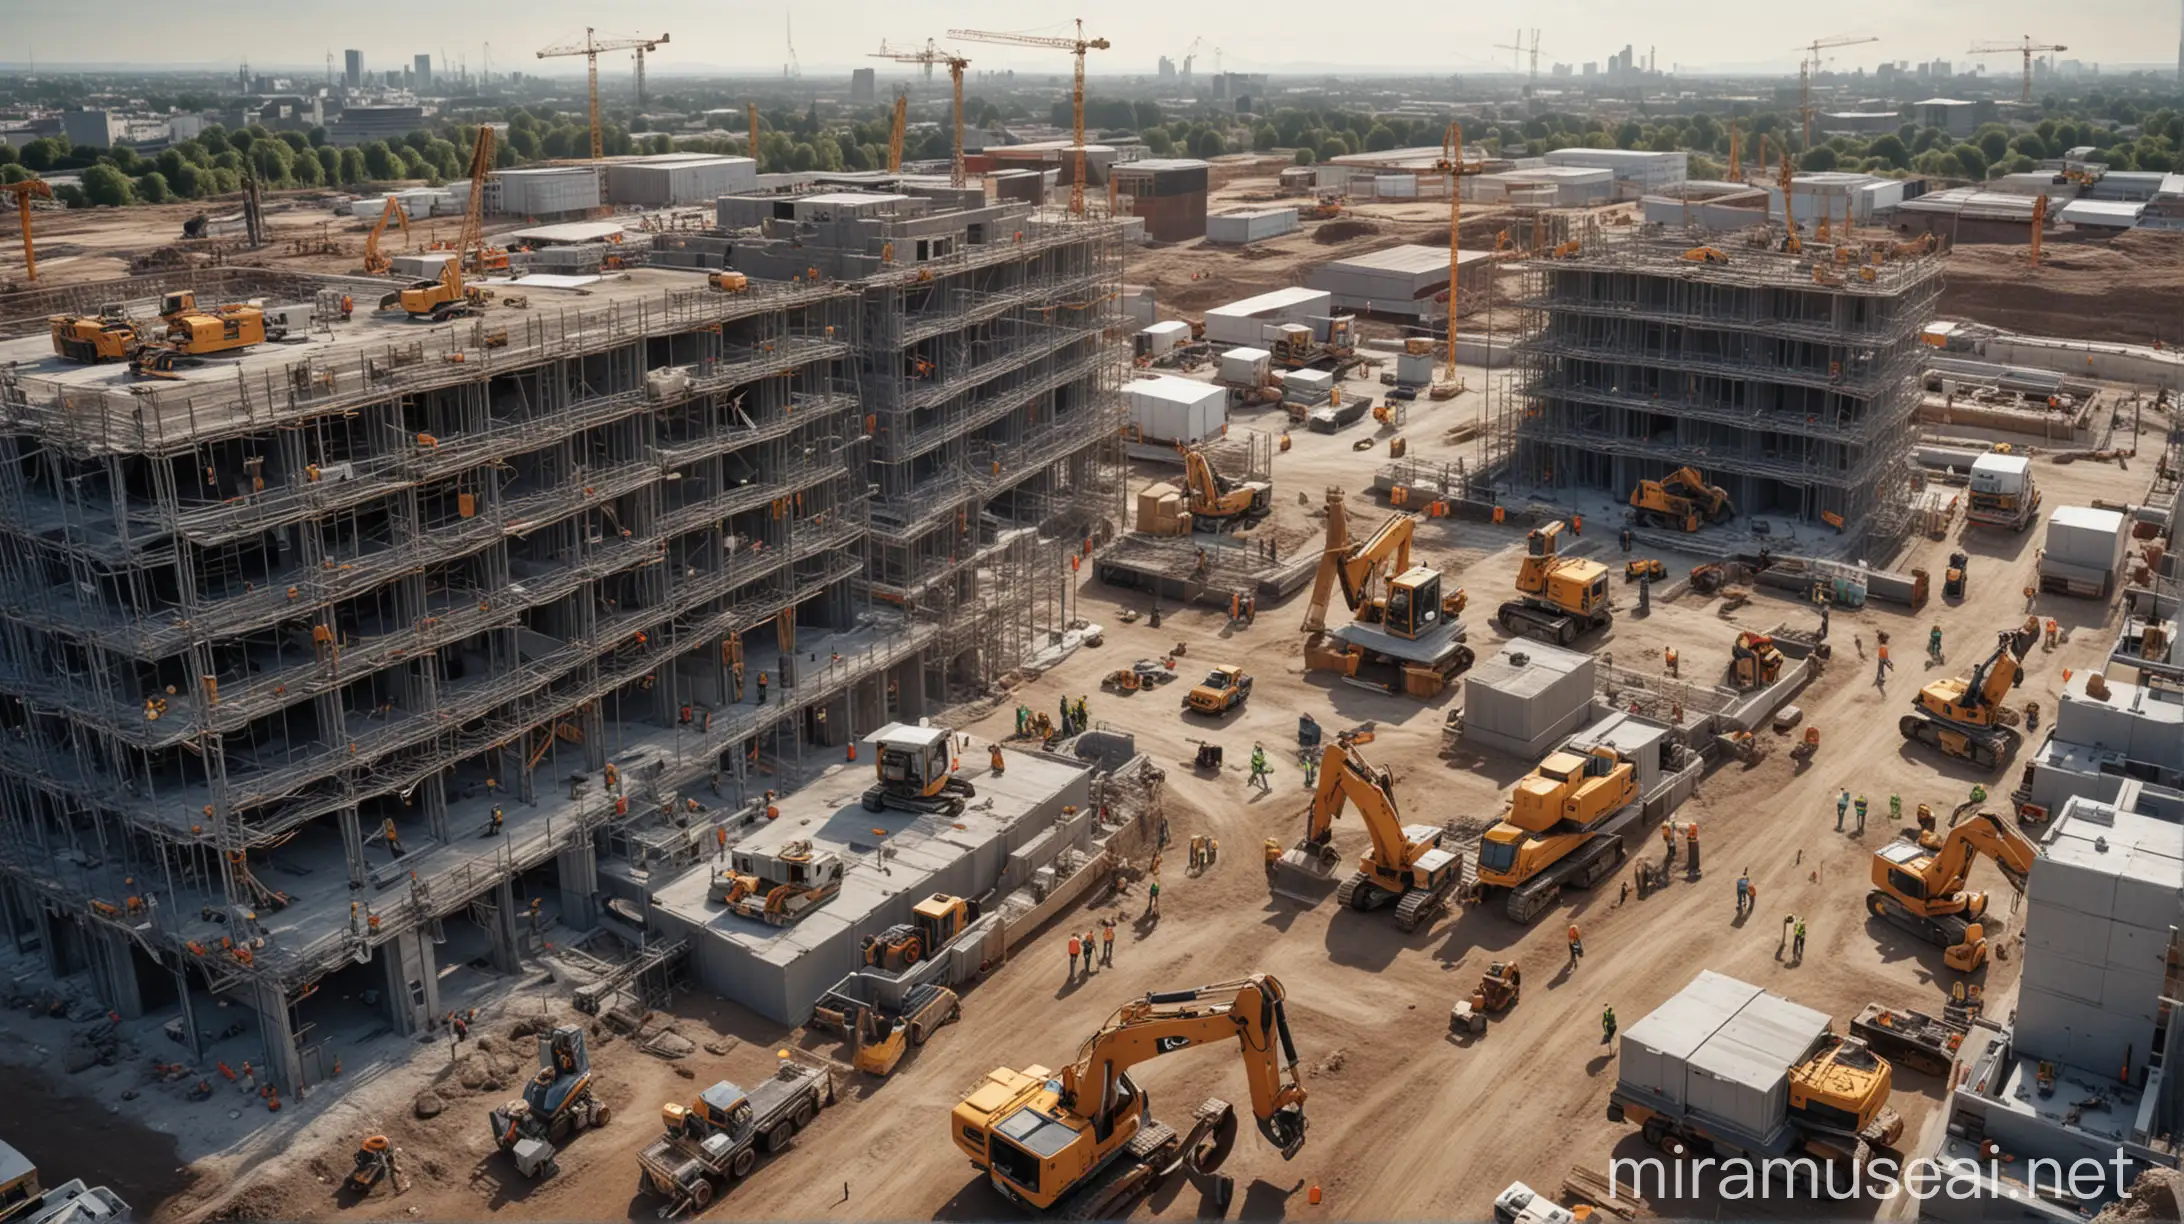 Create a realistic image of a construction site where digital twin, robots, artificial intelligence, IoT are used to build sustainable buildings.  The image must be 1280x600 DPI.